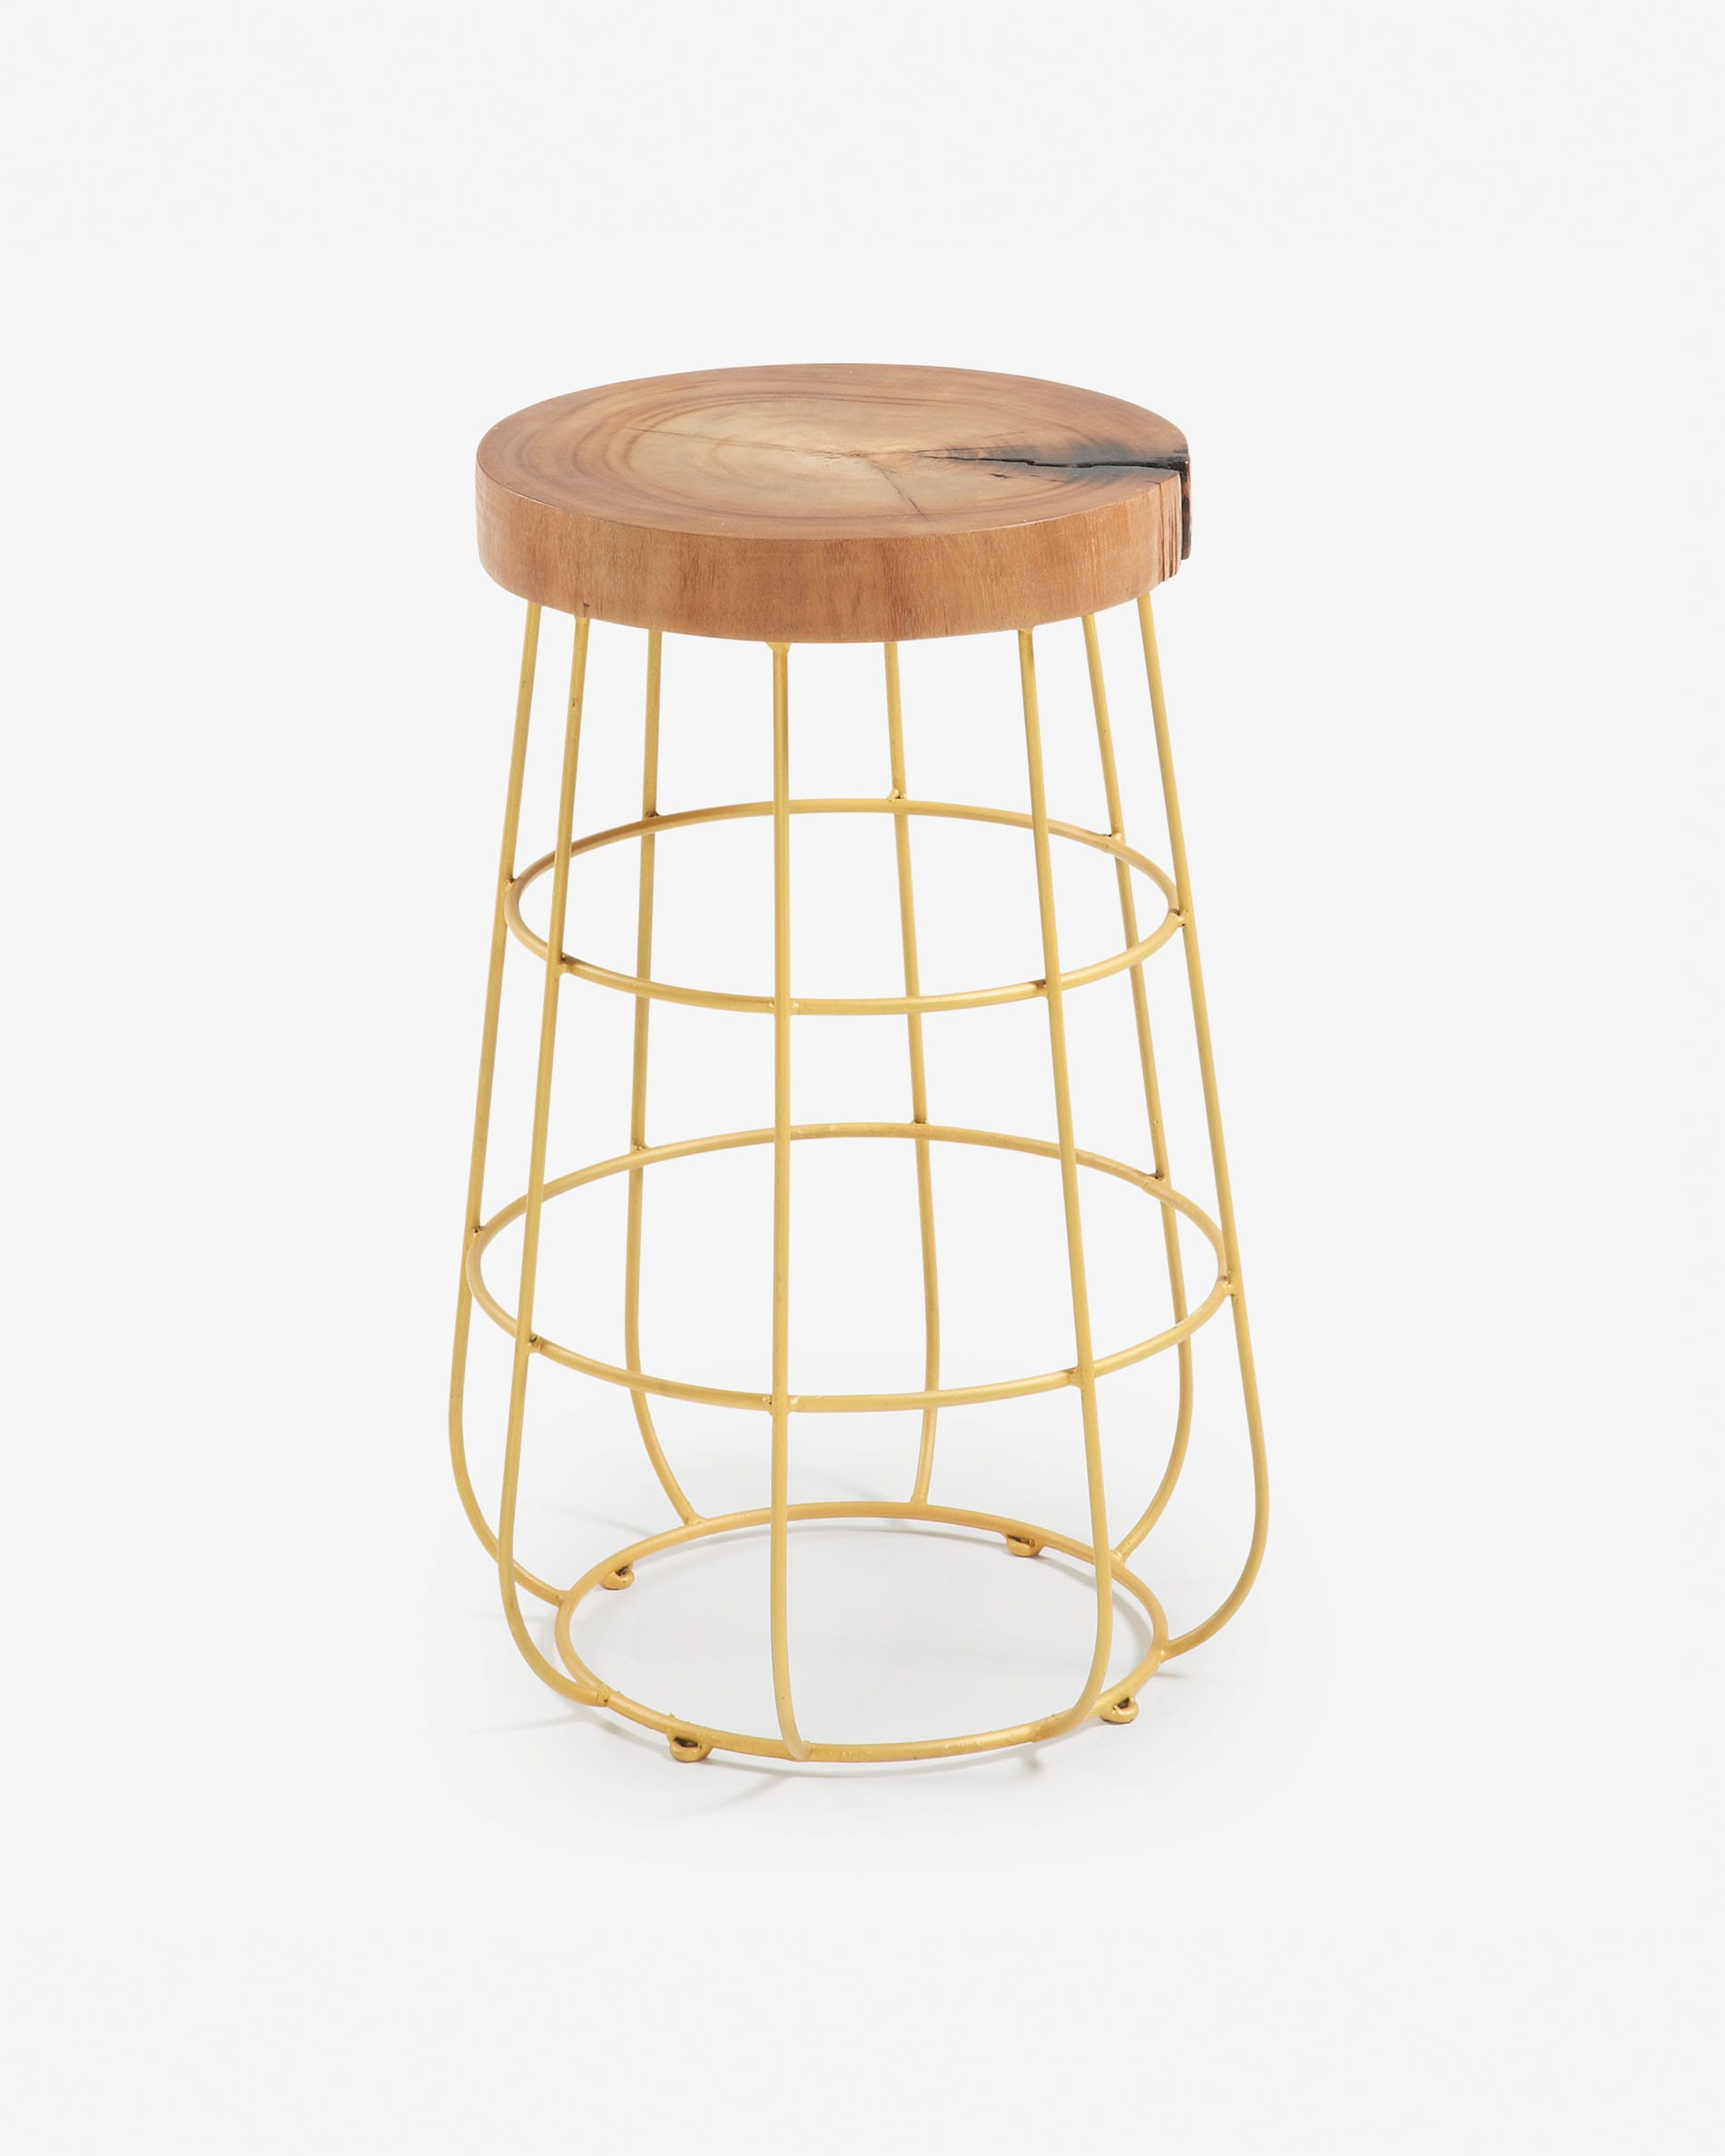 Gluck side table